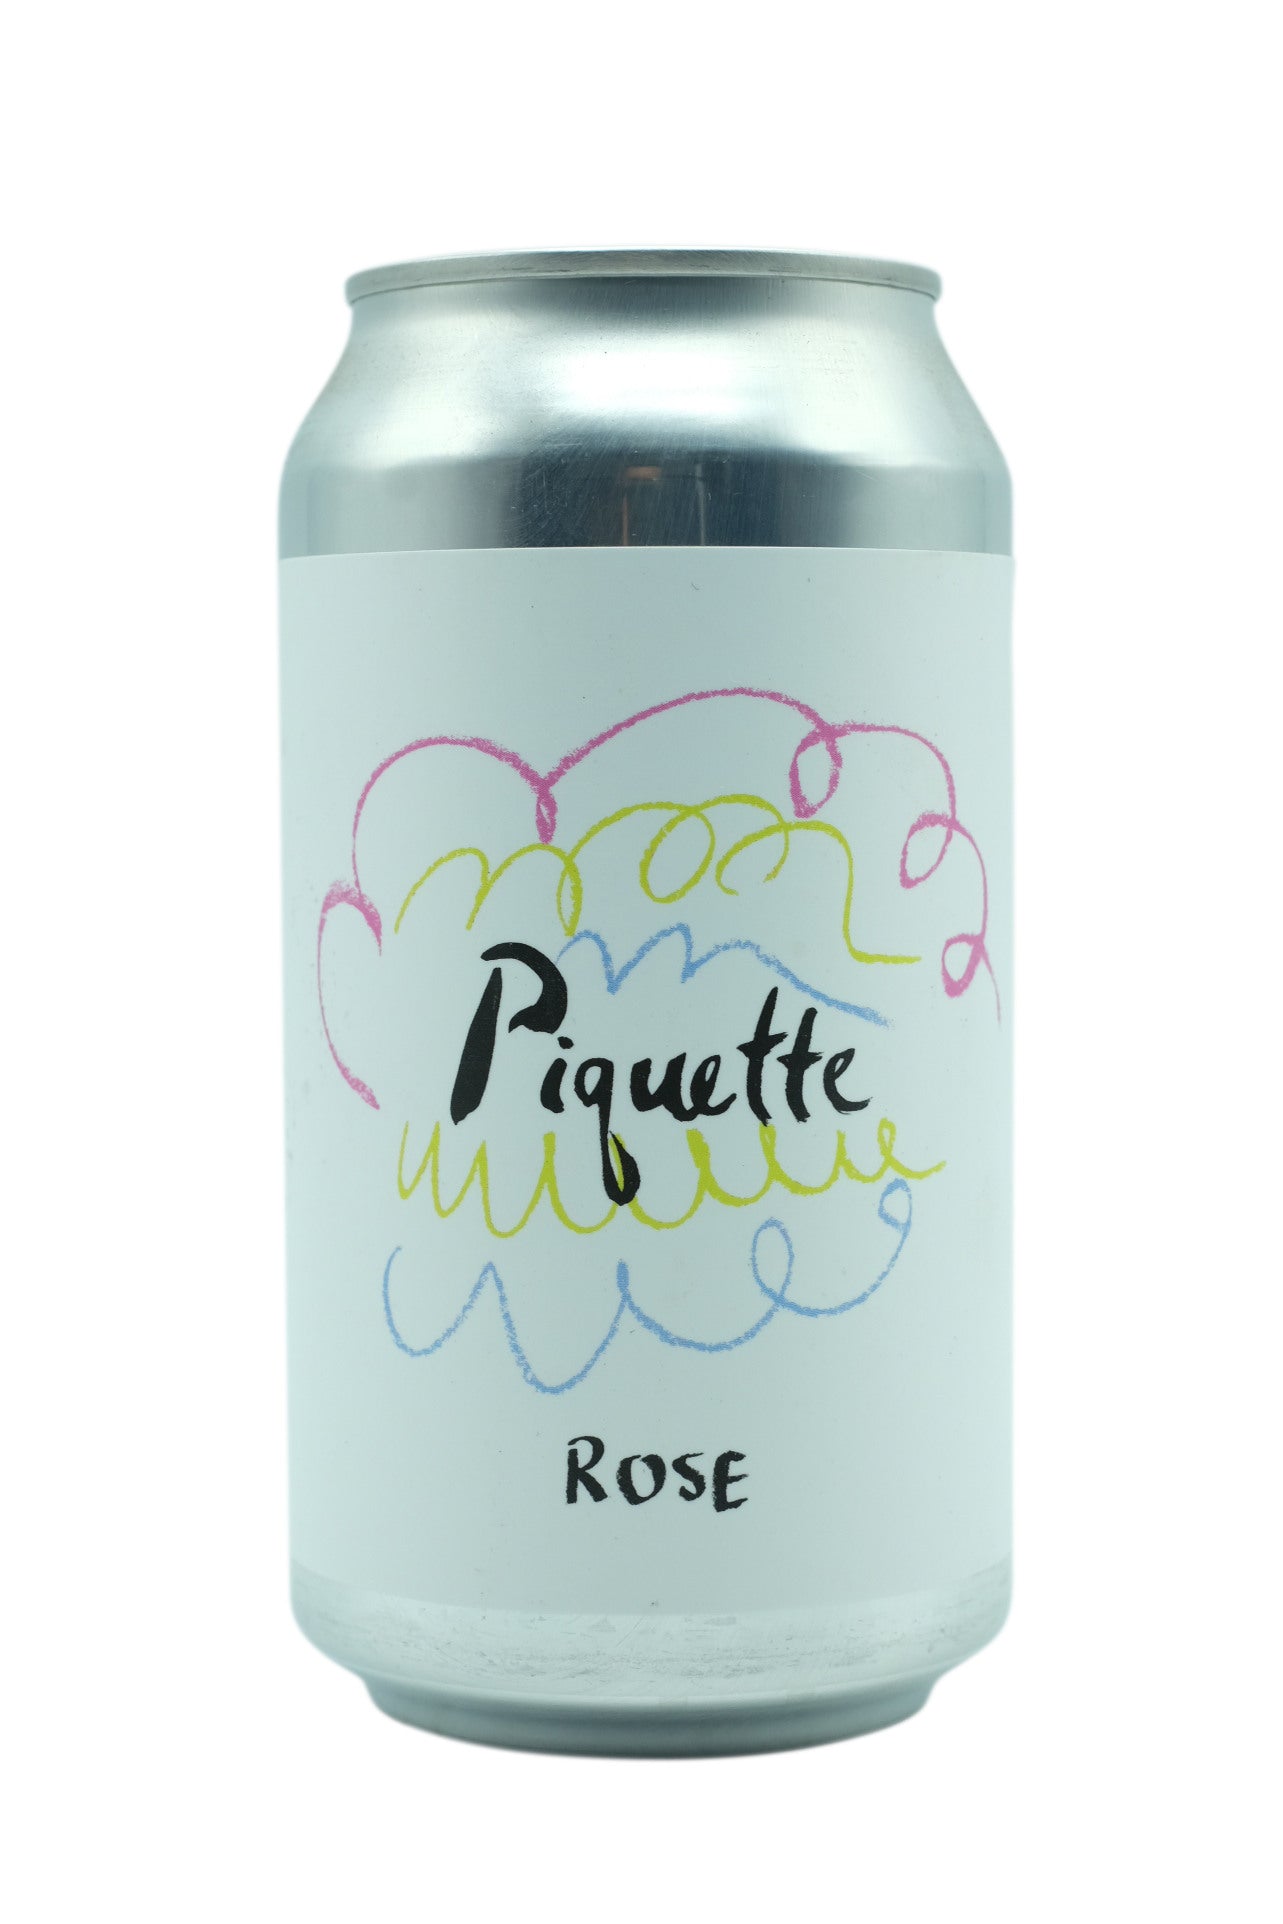 A Sunday in August Piquette Rosé Can